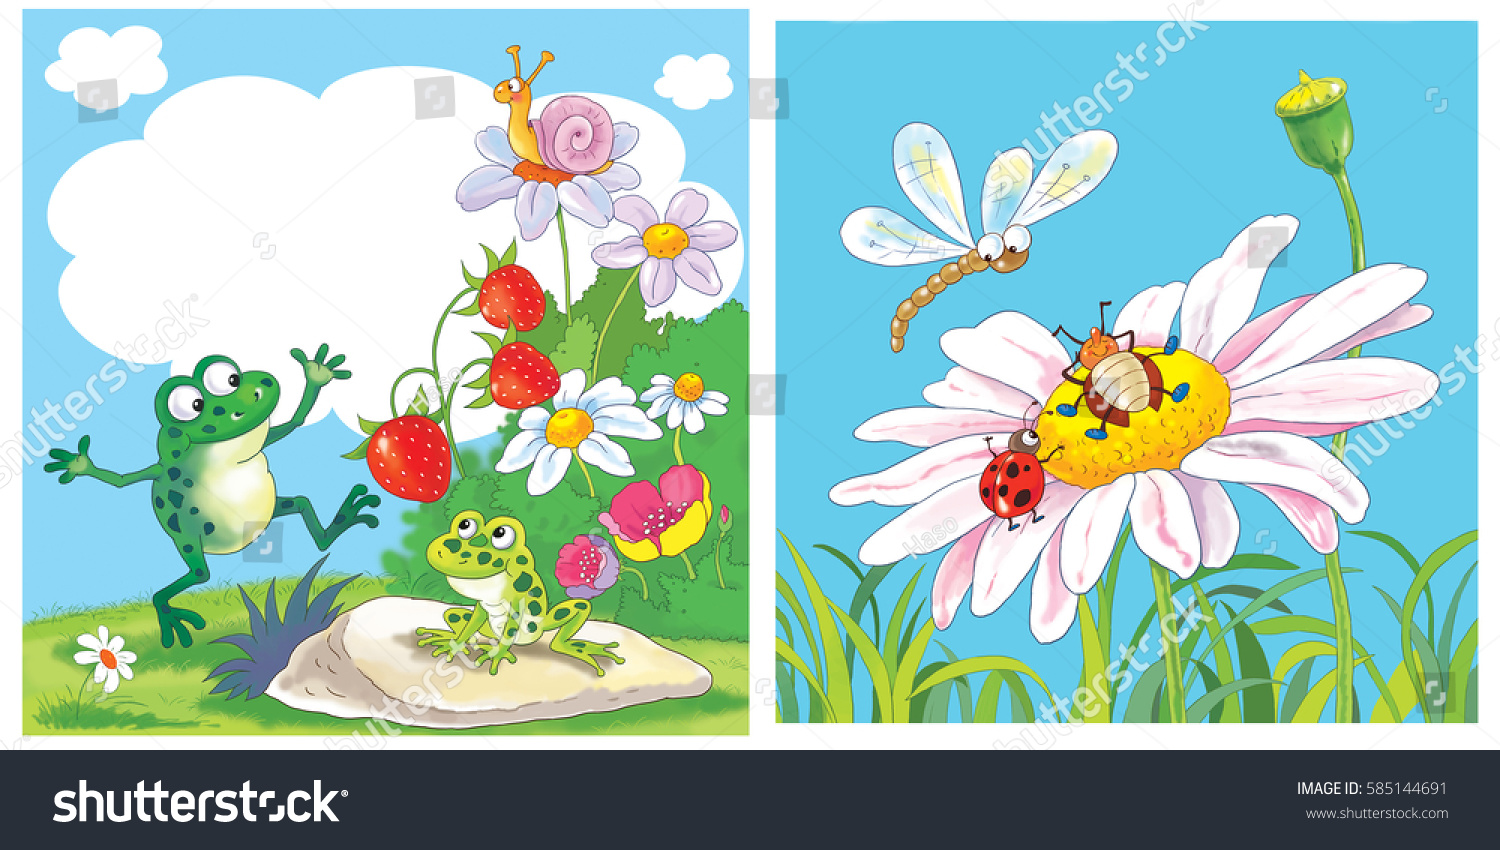 Two Pictures Cute Frog Snail Beetledragonfly Stock Illustration ...